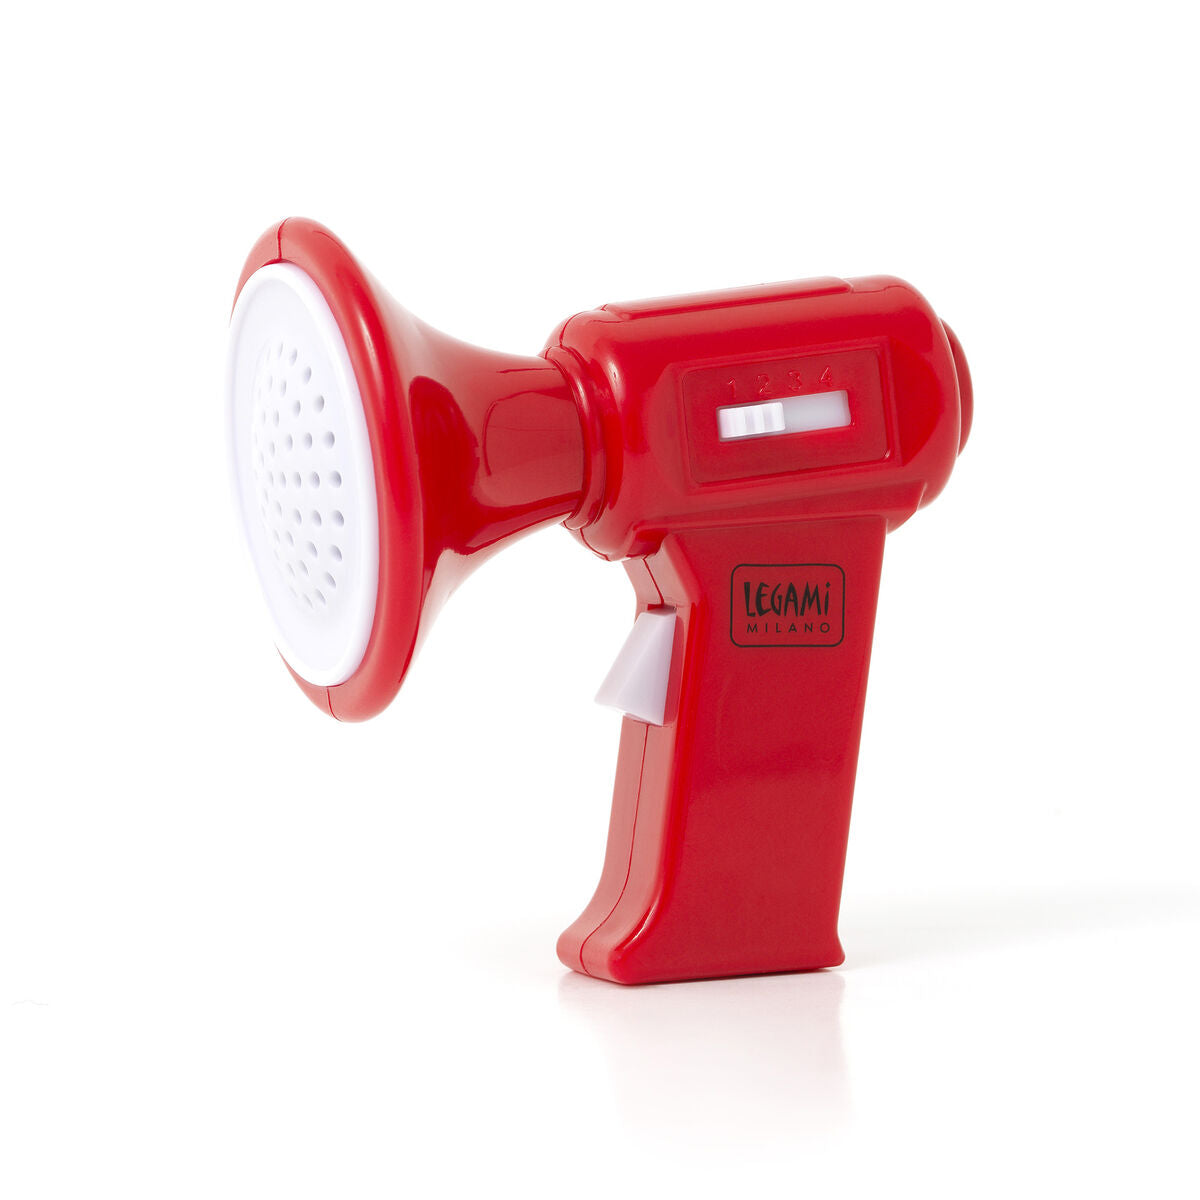 Gift | Legami Mini Voice Changer Megaphone by Weirs of Baggot St